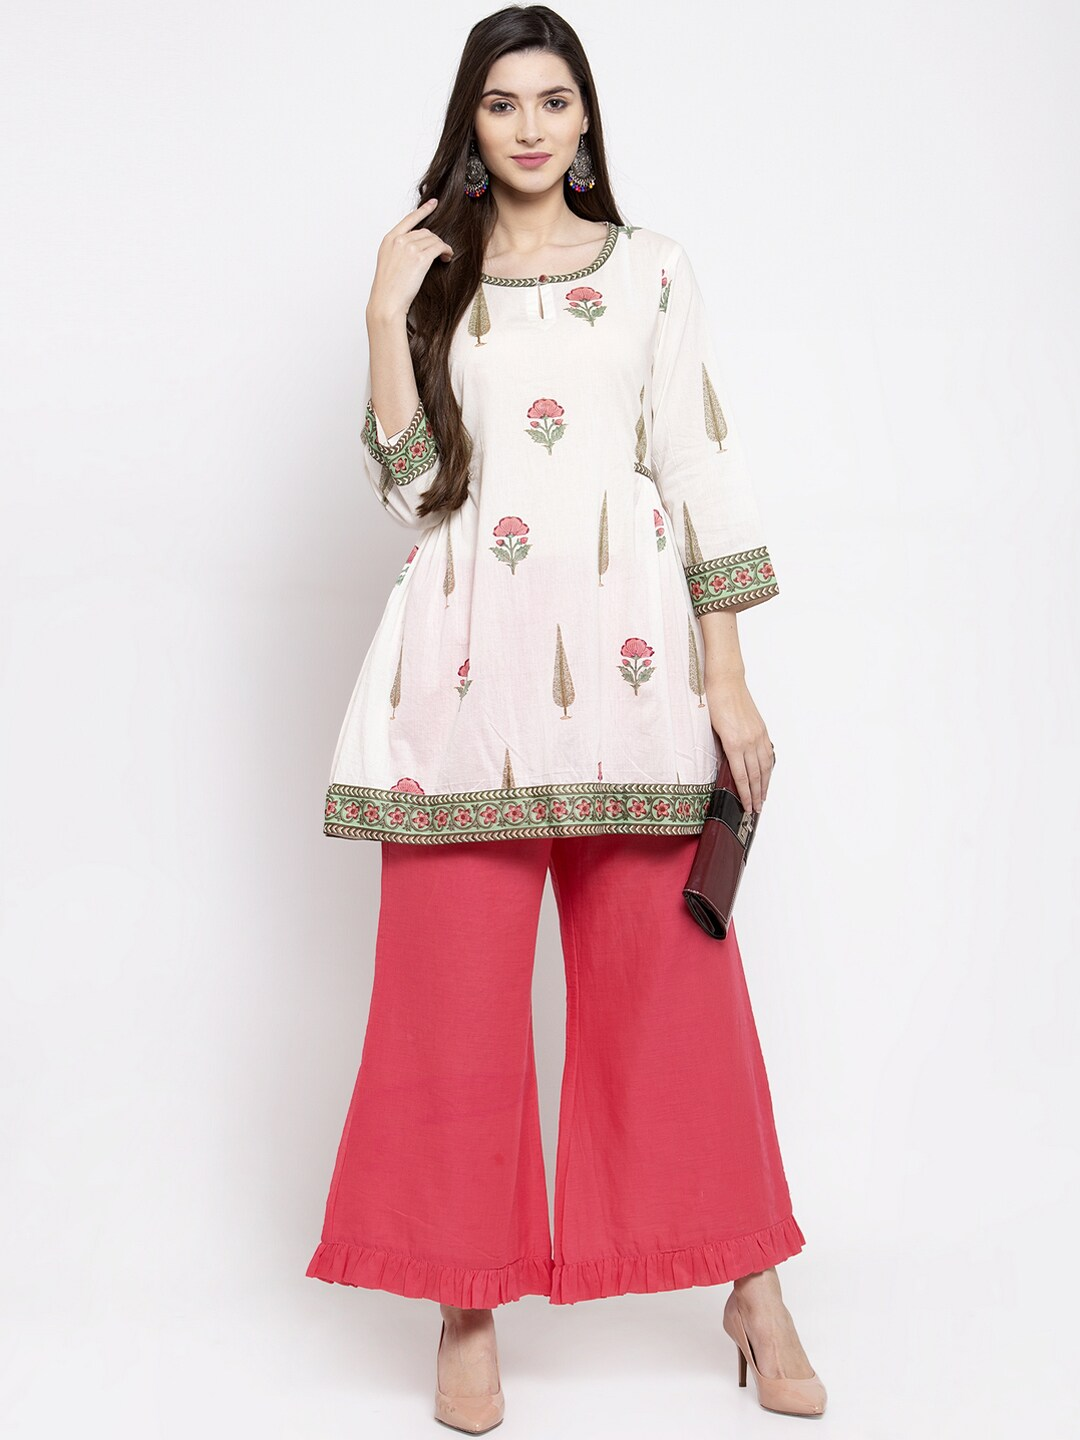 Women's  Off-White & Green Printed Tunic - Wahe-NOOR